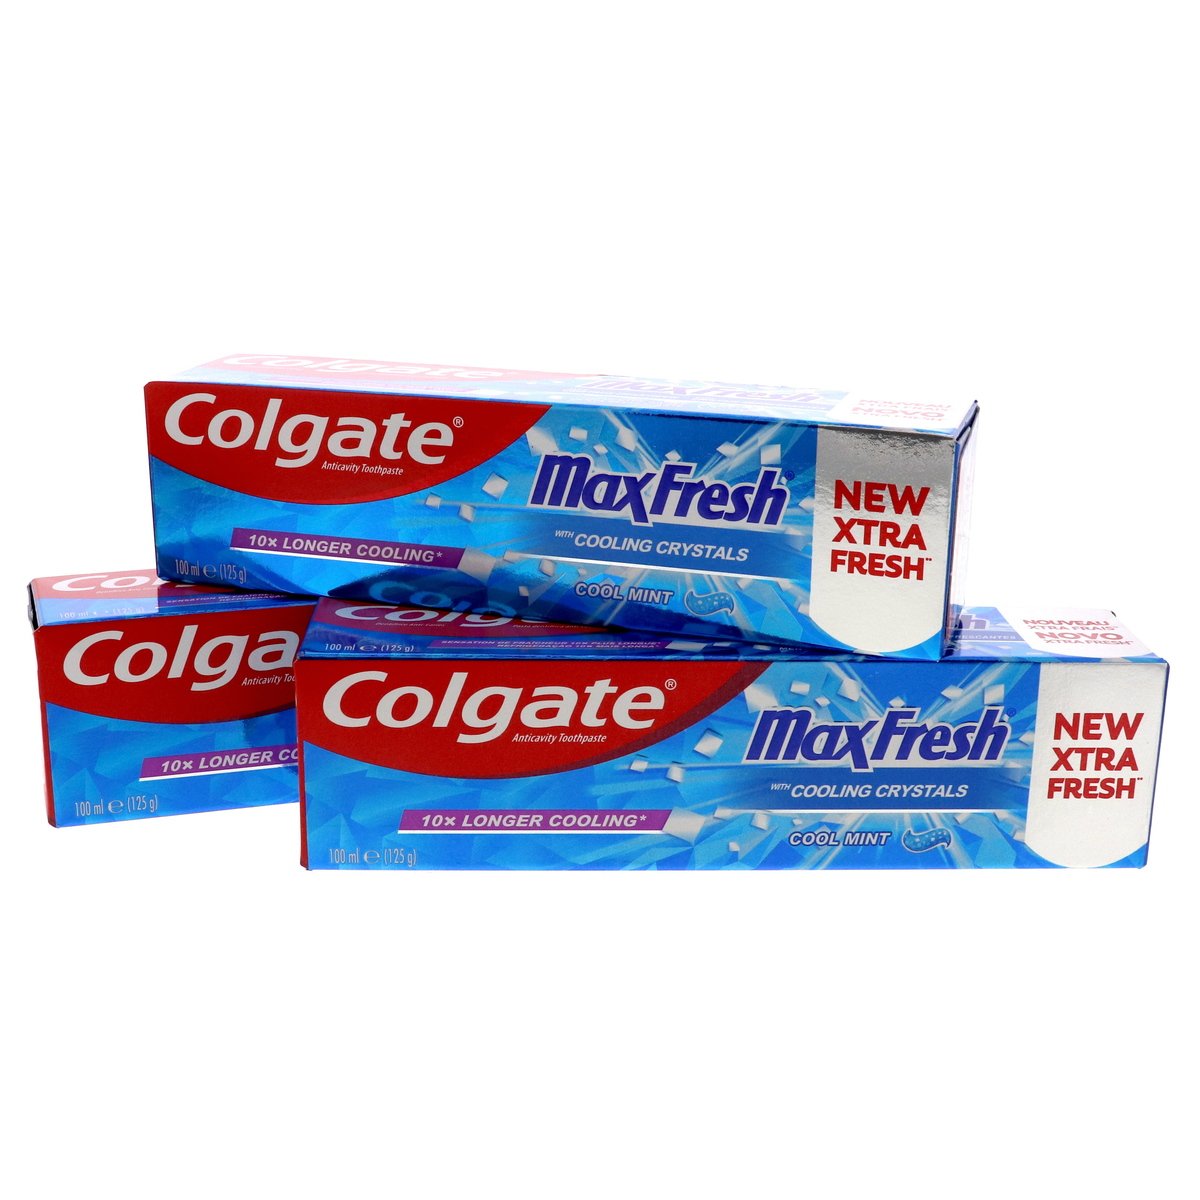 Colgate Max Fresh Cool Mint Toothpaste 3 x 100 ml